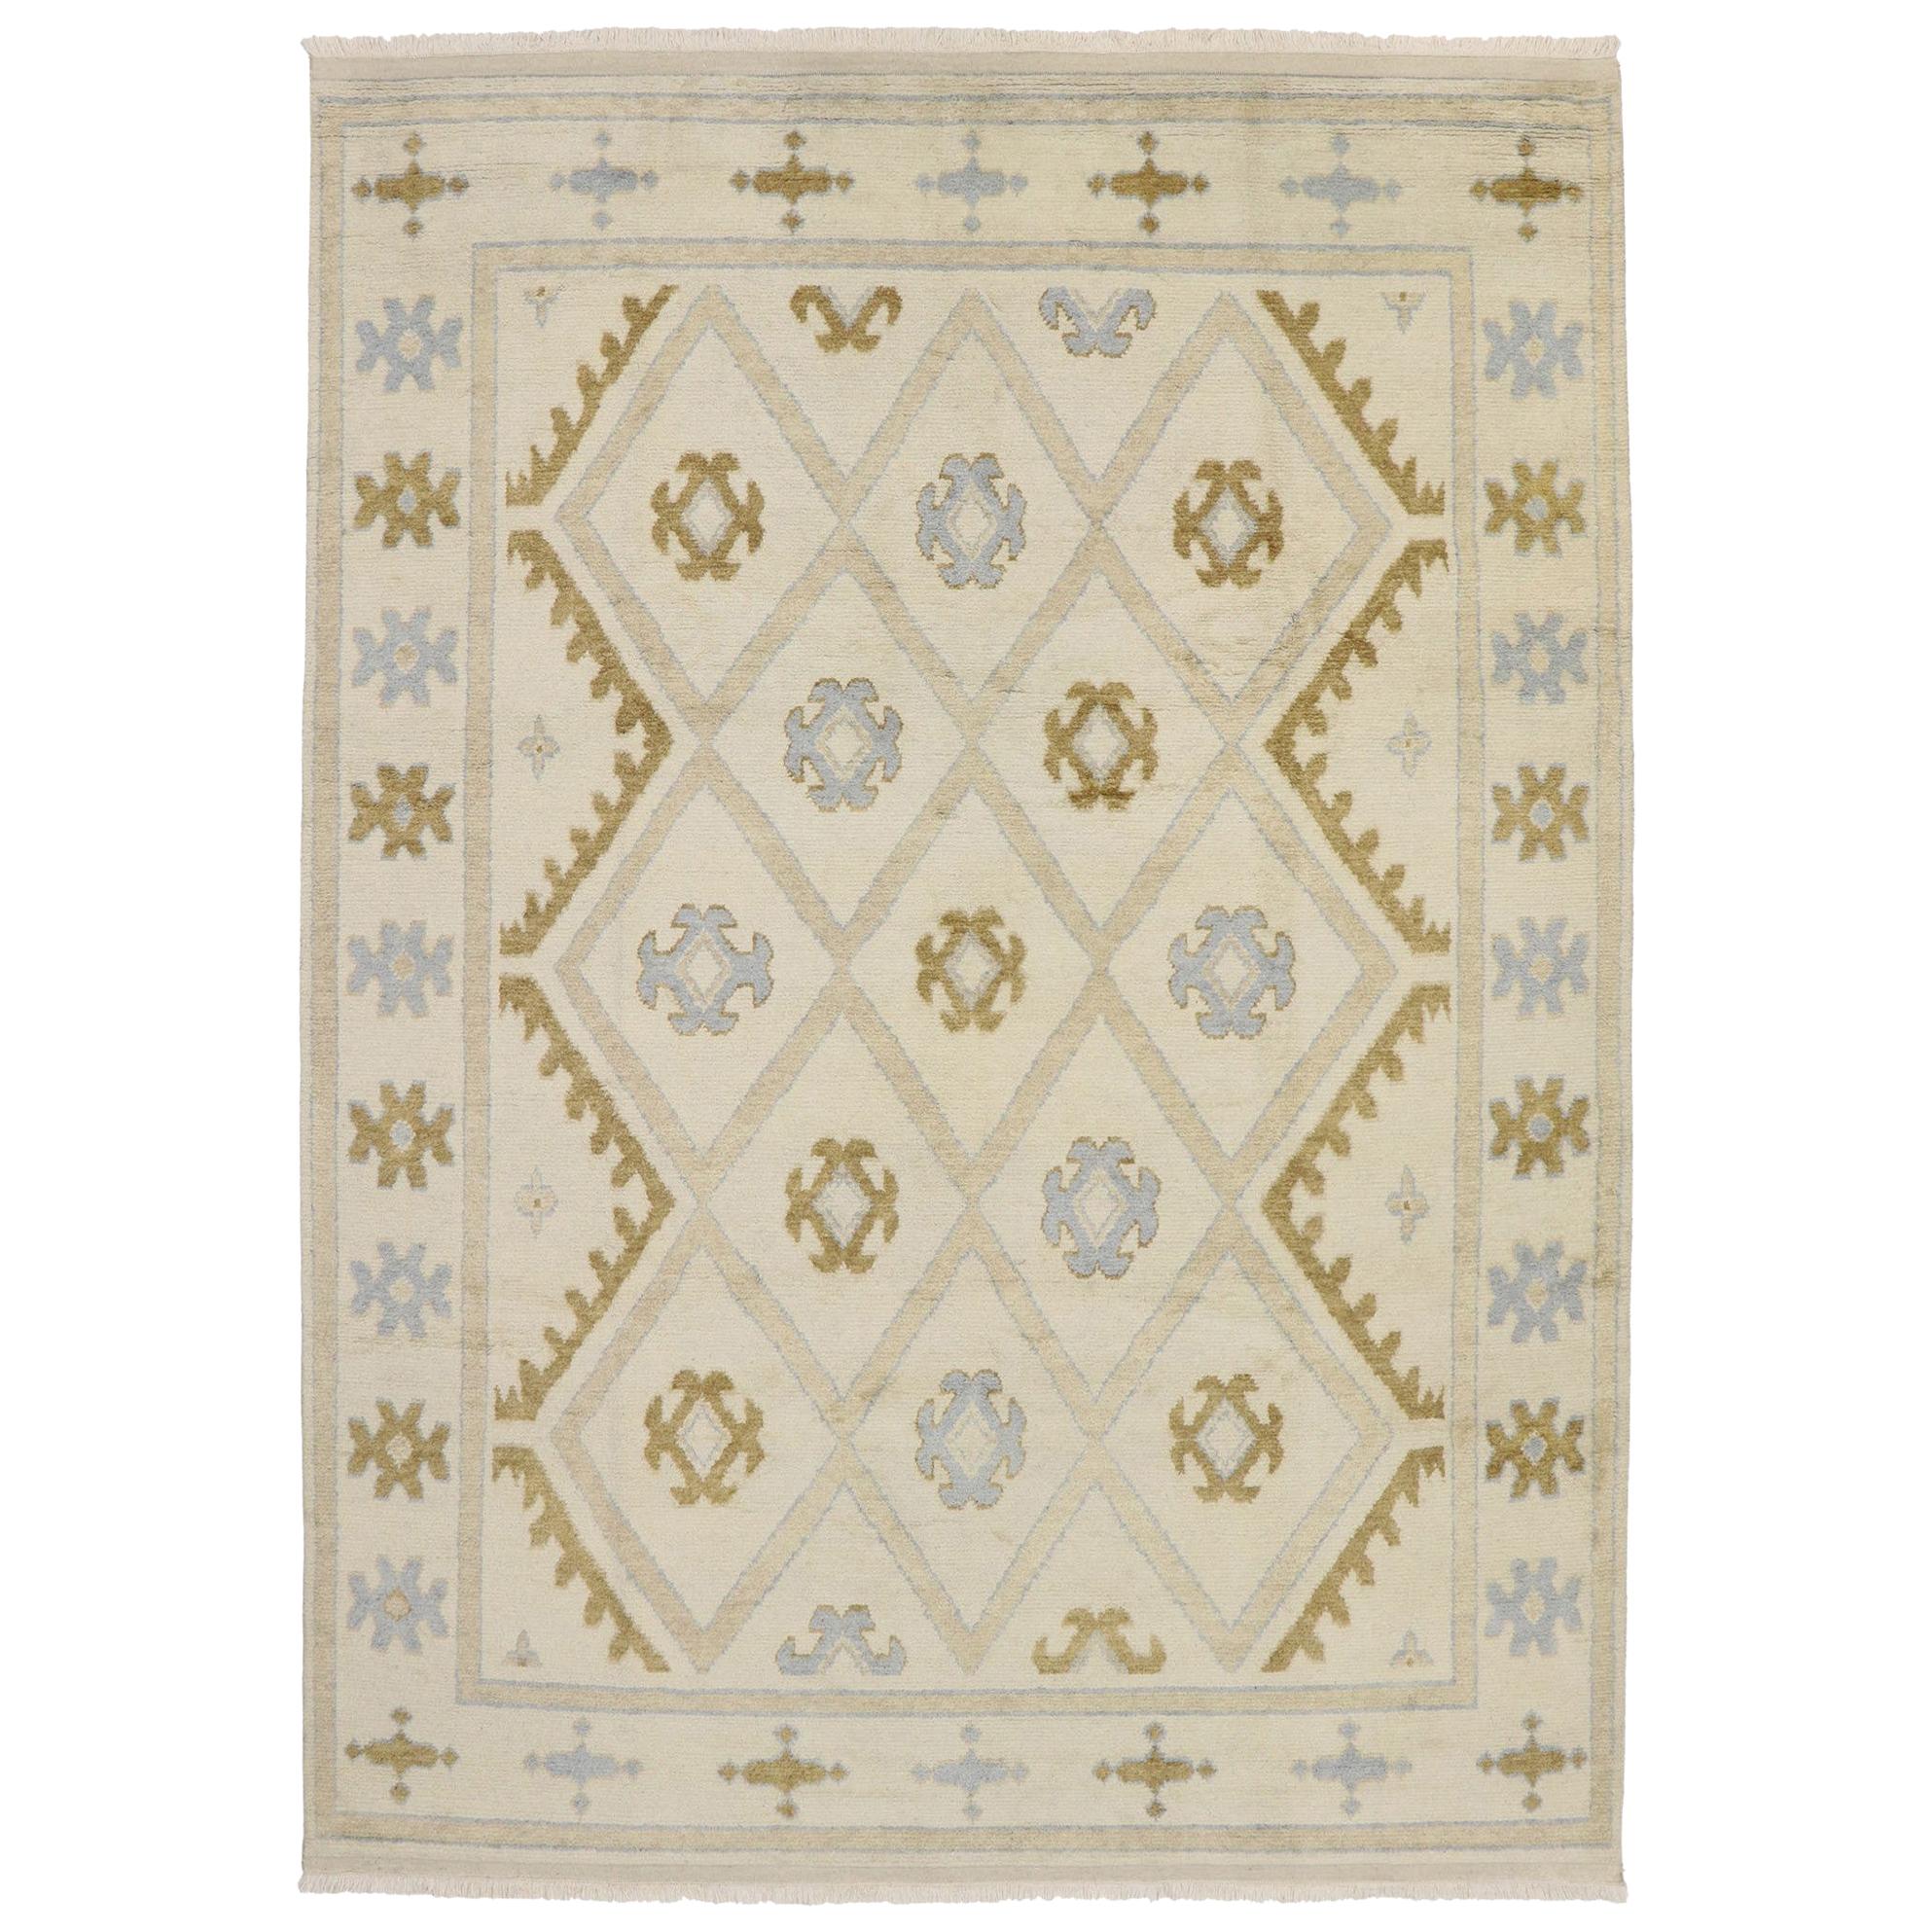 New Contemporary Moroccan Style Rug with Modern Style